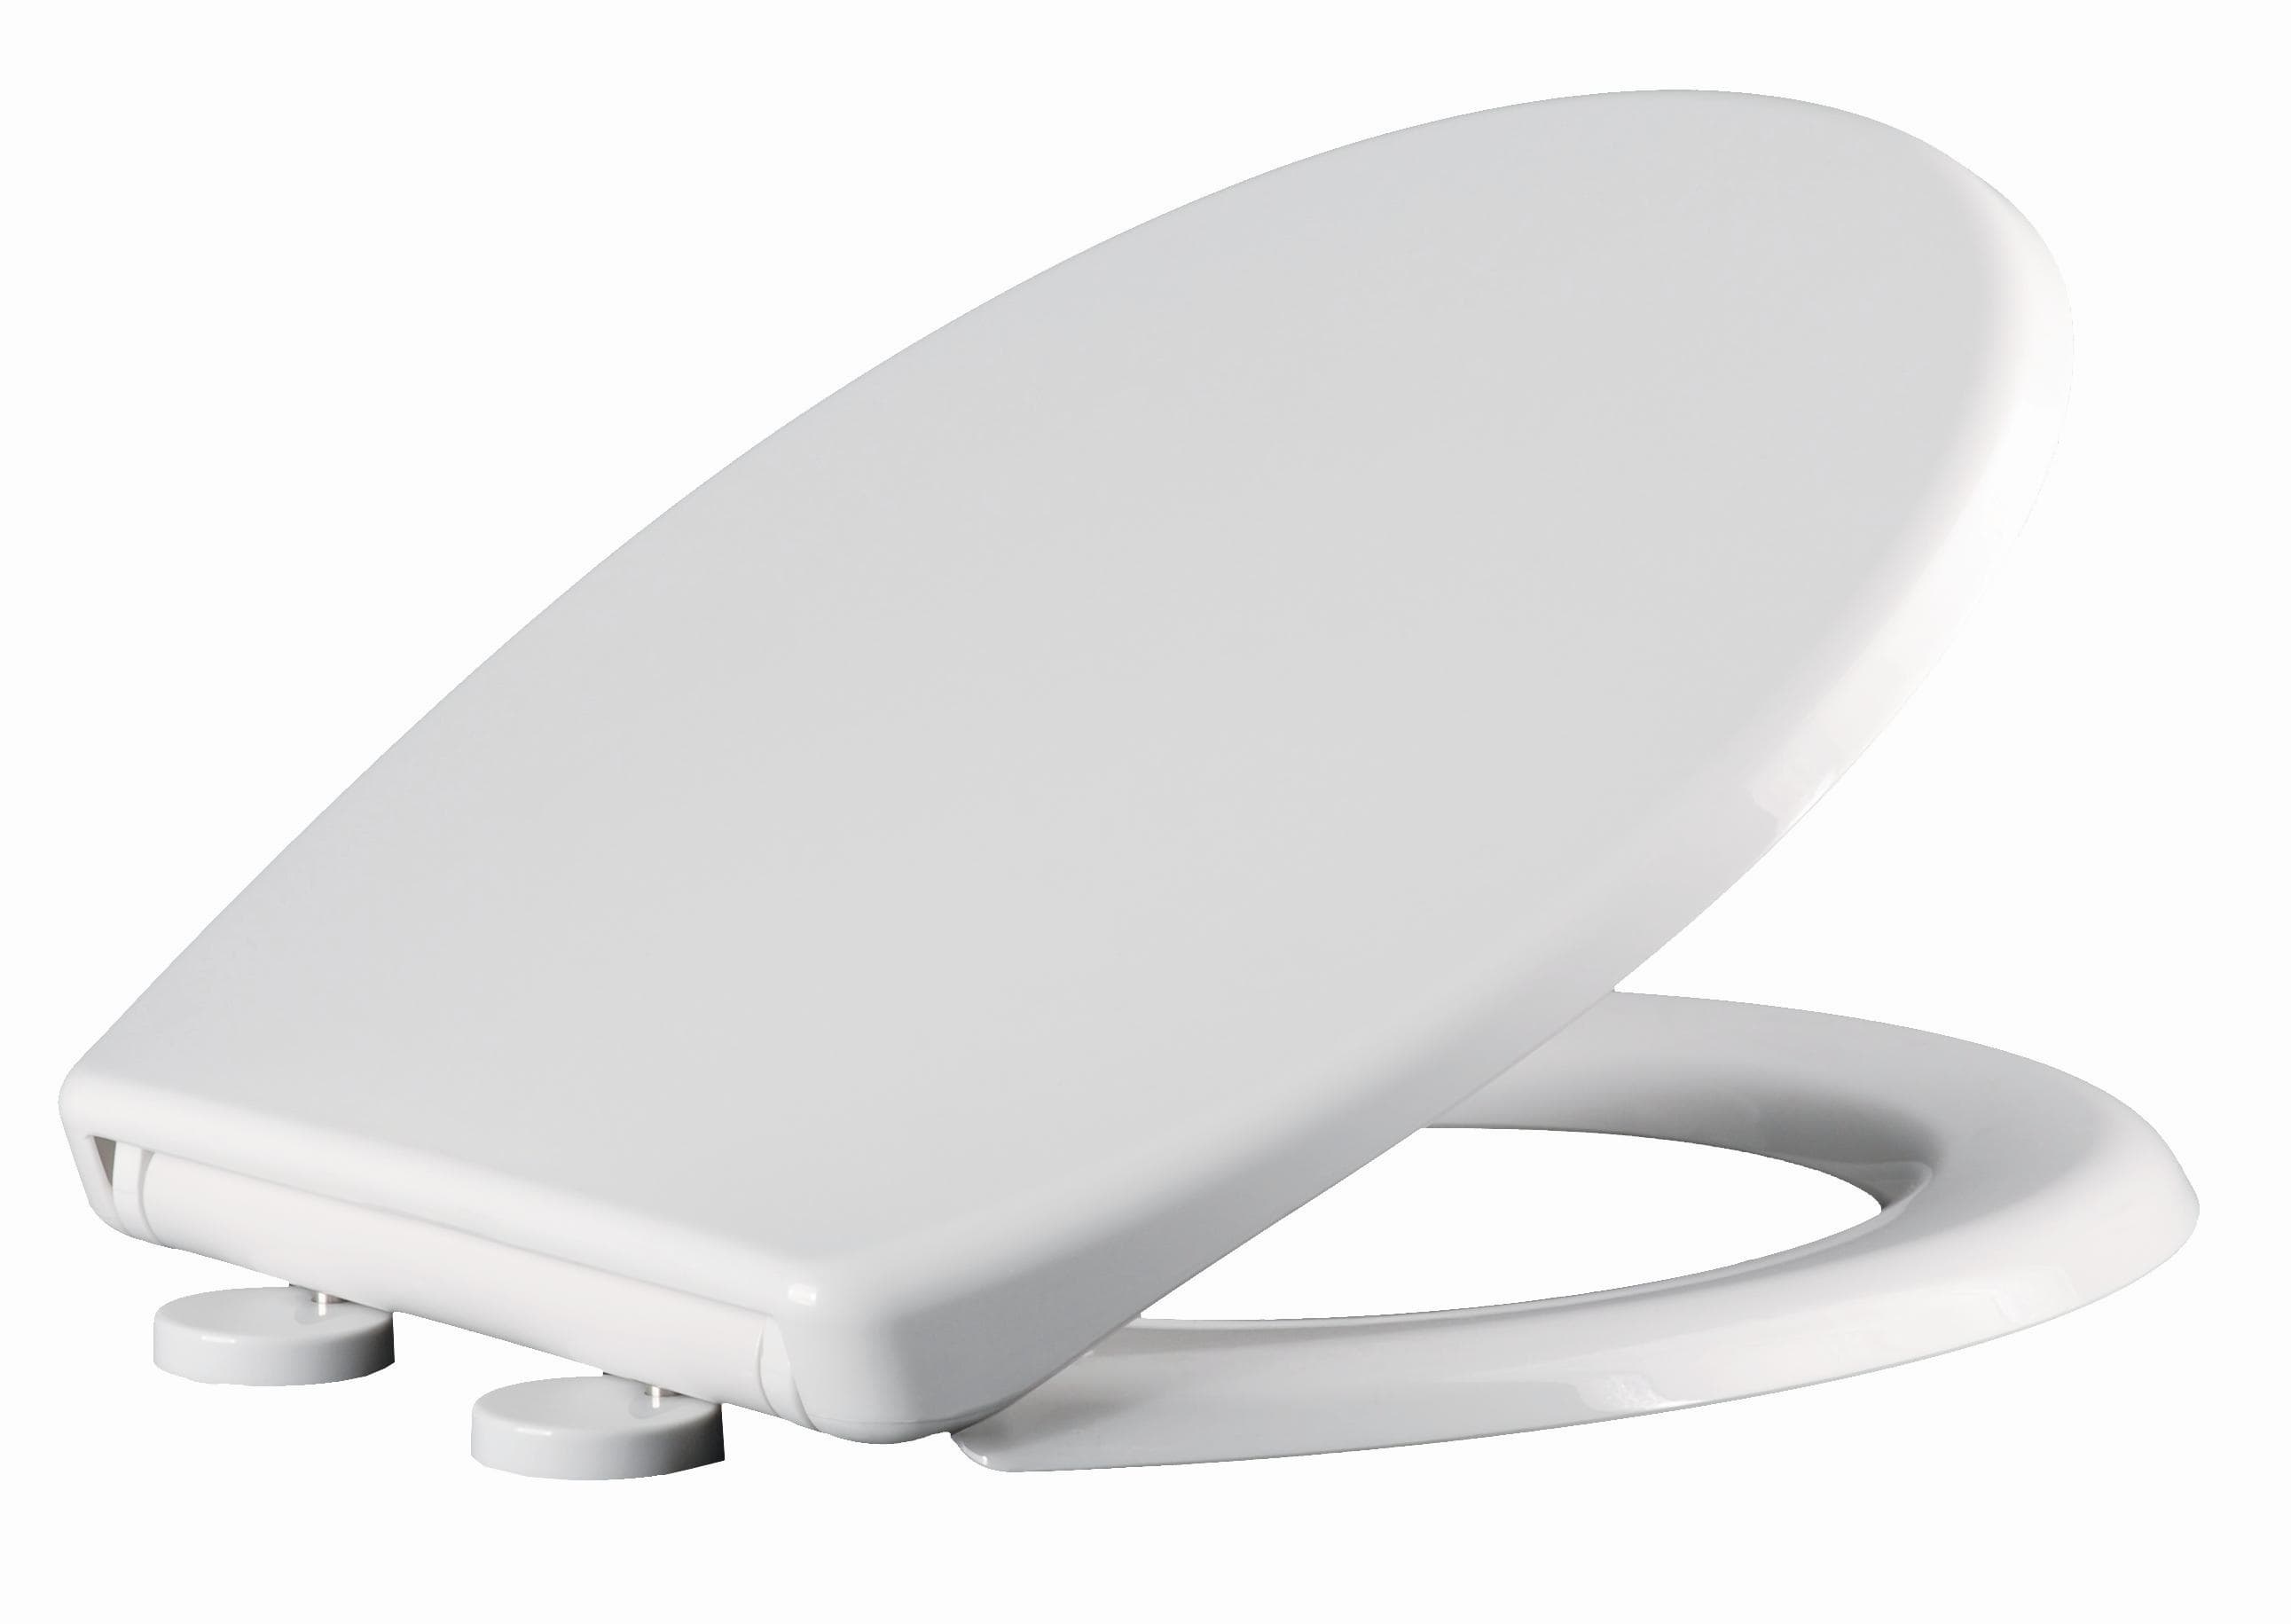 EU standard PP toilet seat with soft close and quick release